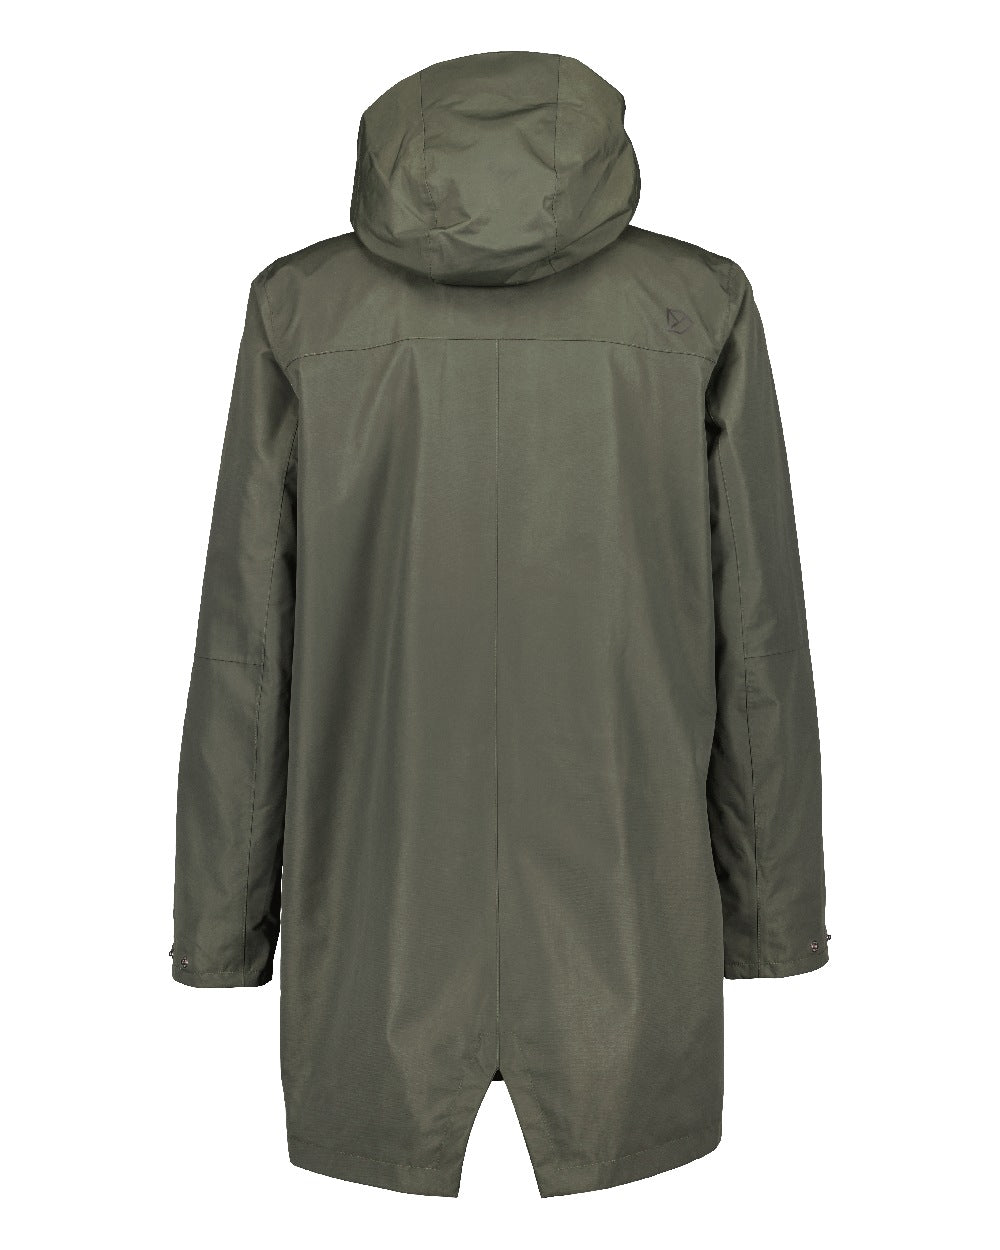 Didriksons Andreas Parka in Deep Green 